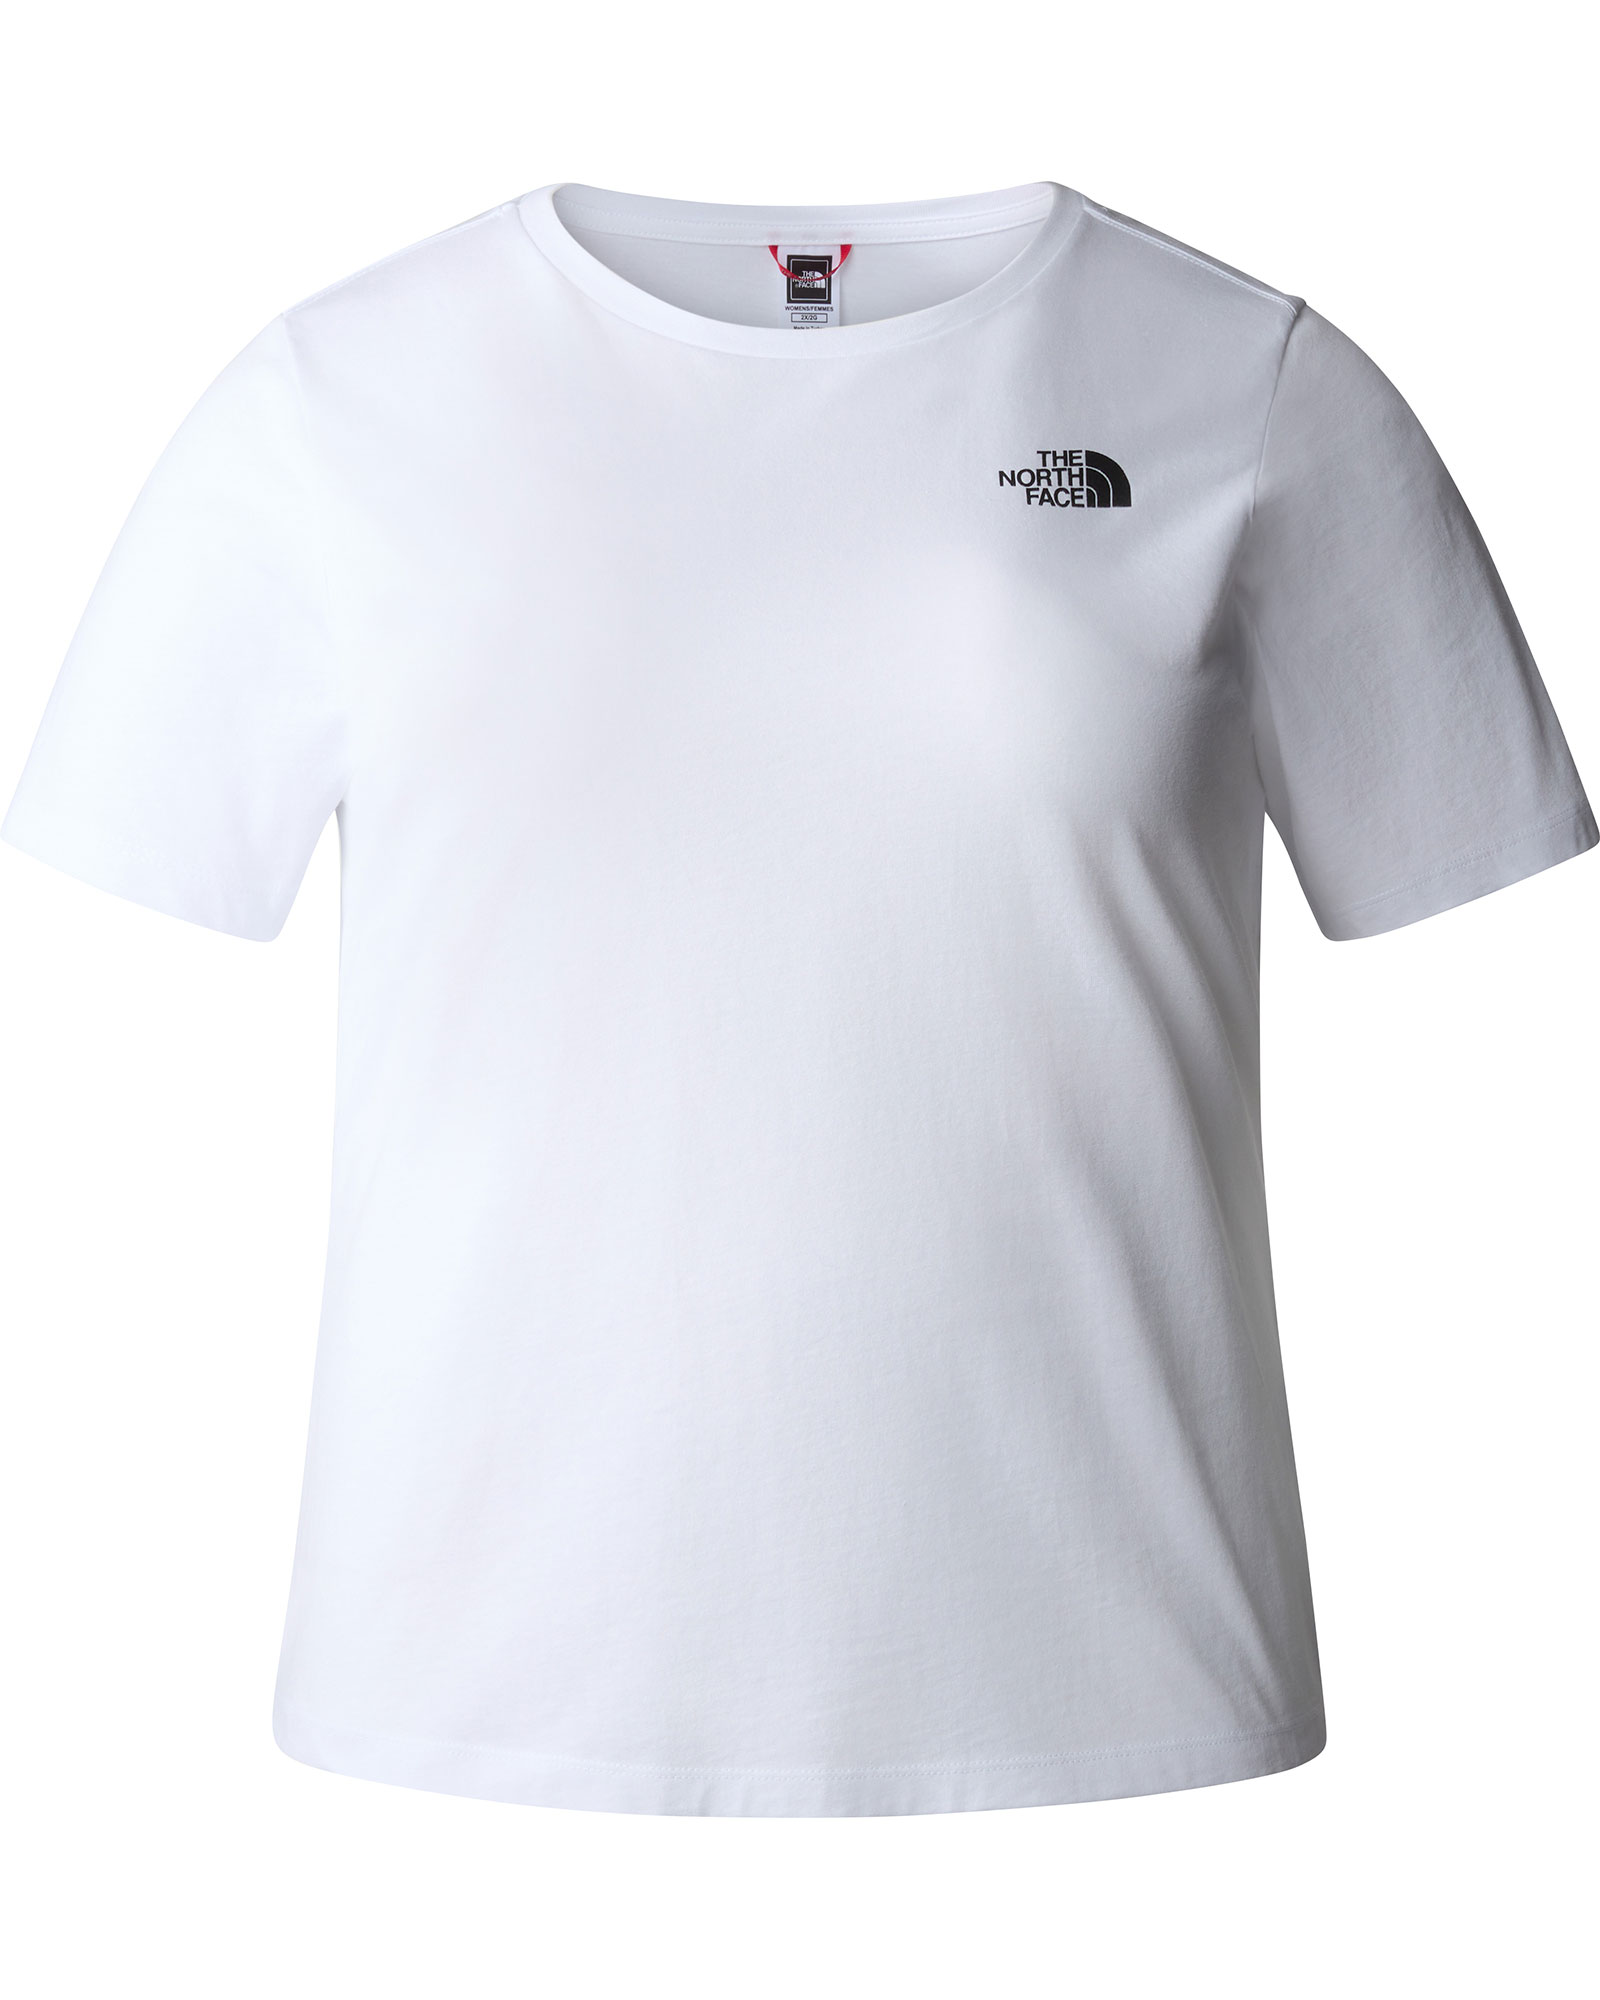 The North Face Plus Simple Dome Women’s T Shirt - TNF White 1X